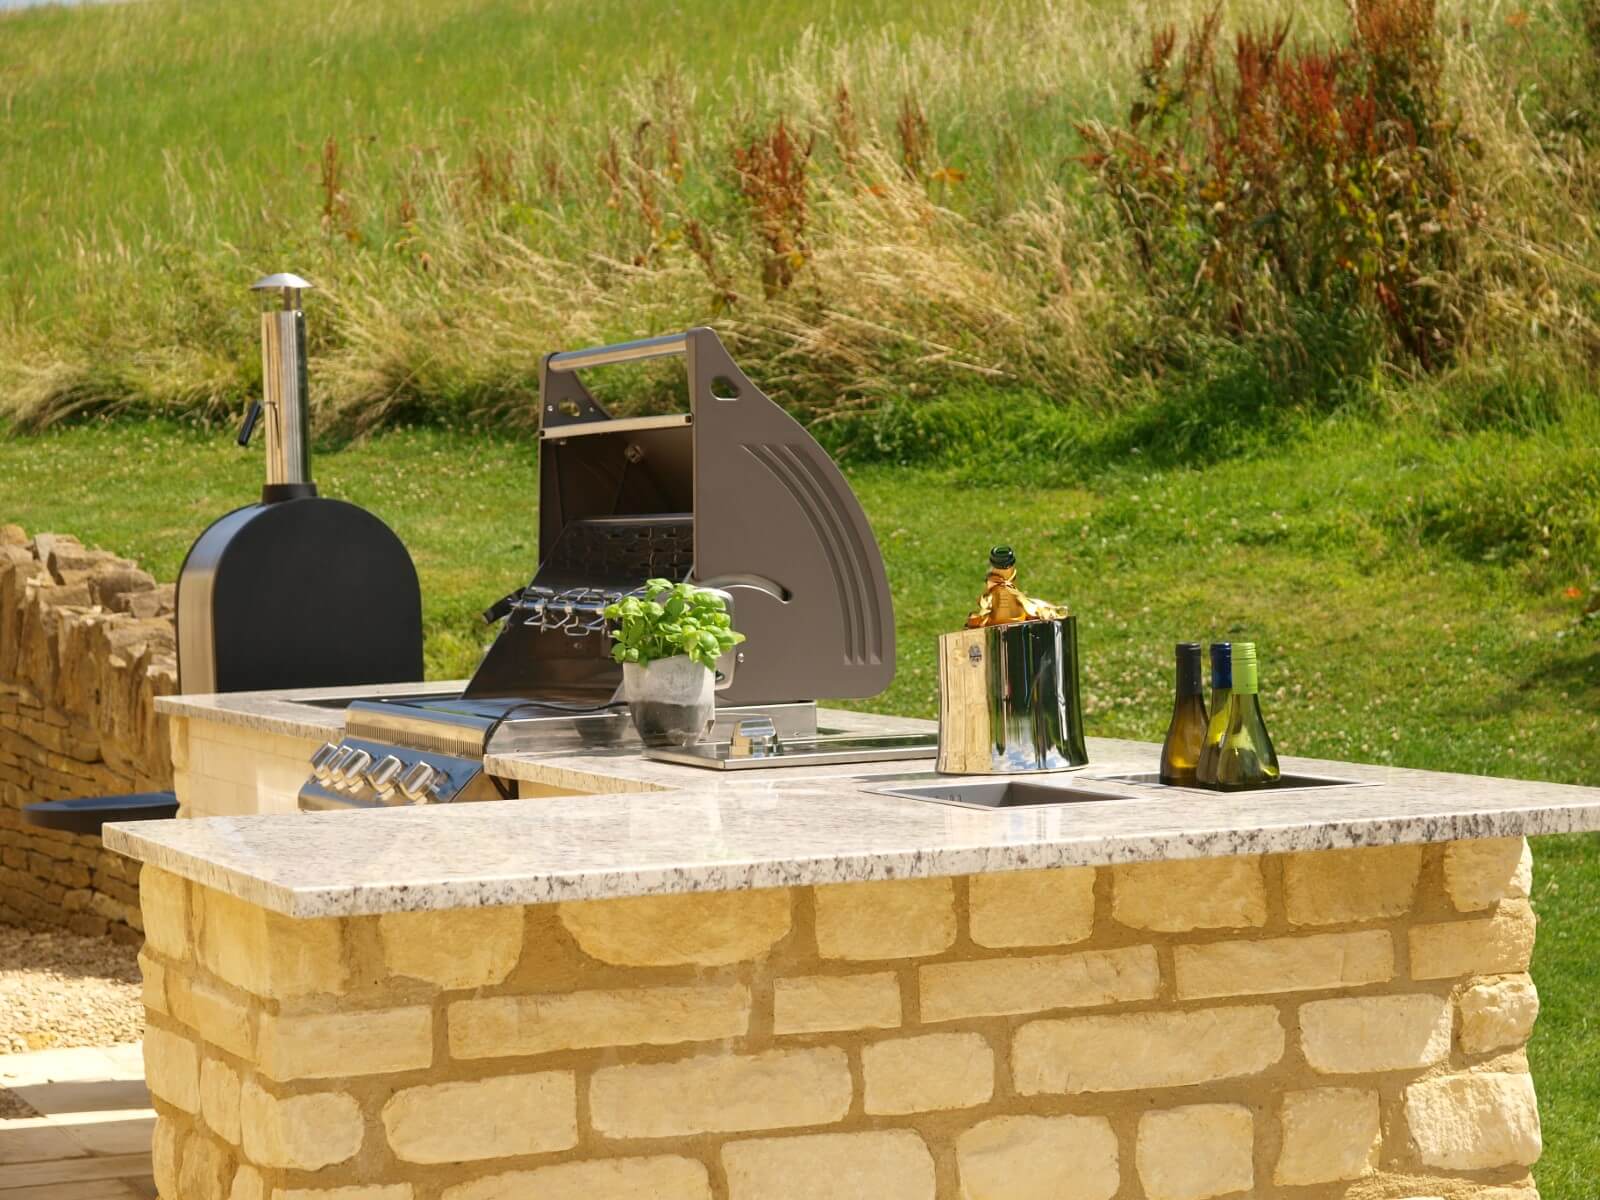 Outdoor Kitchen with Breakfast Bar in Natural stone